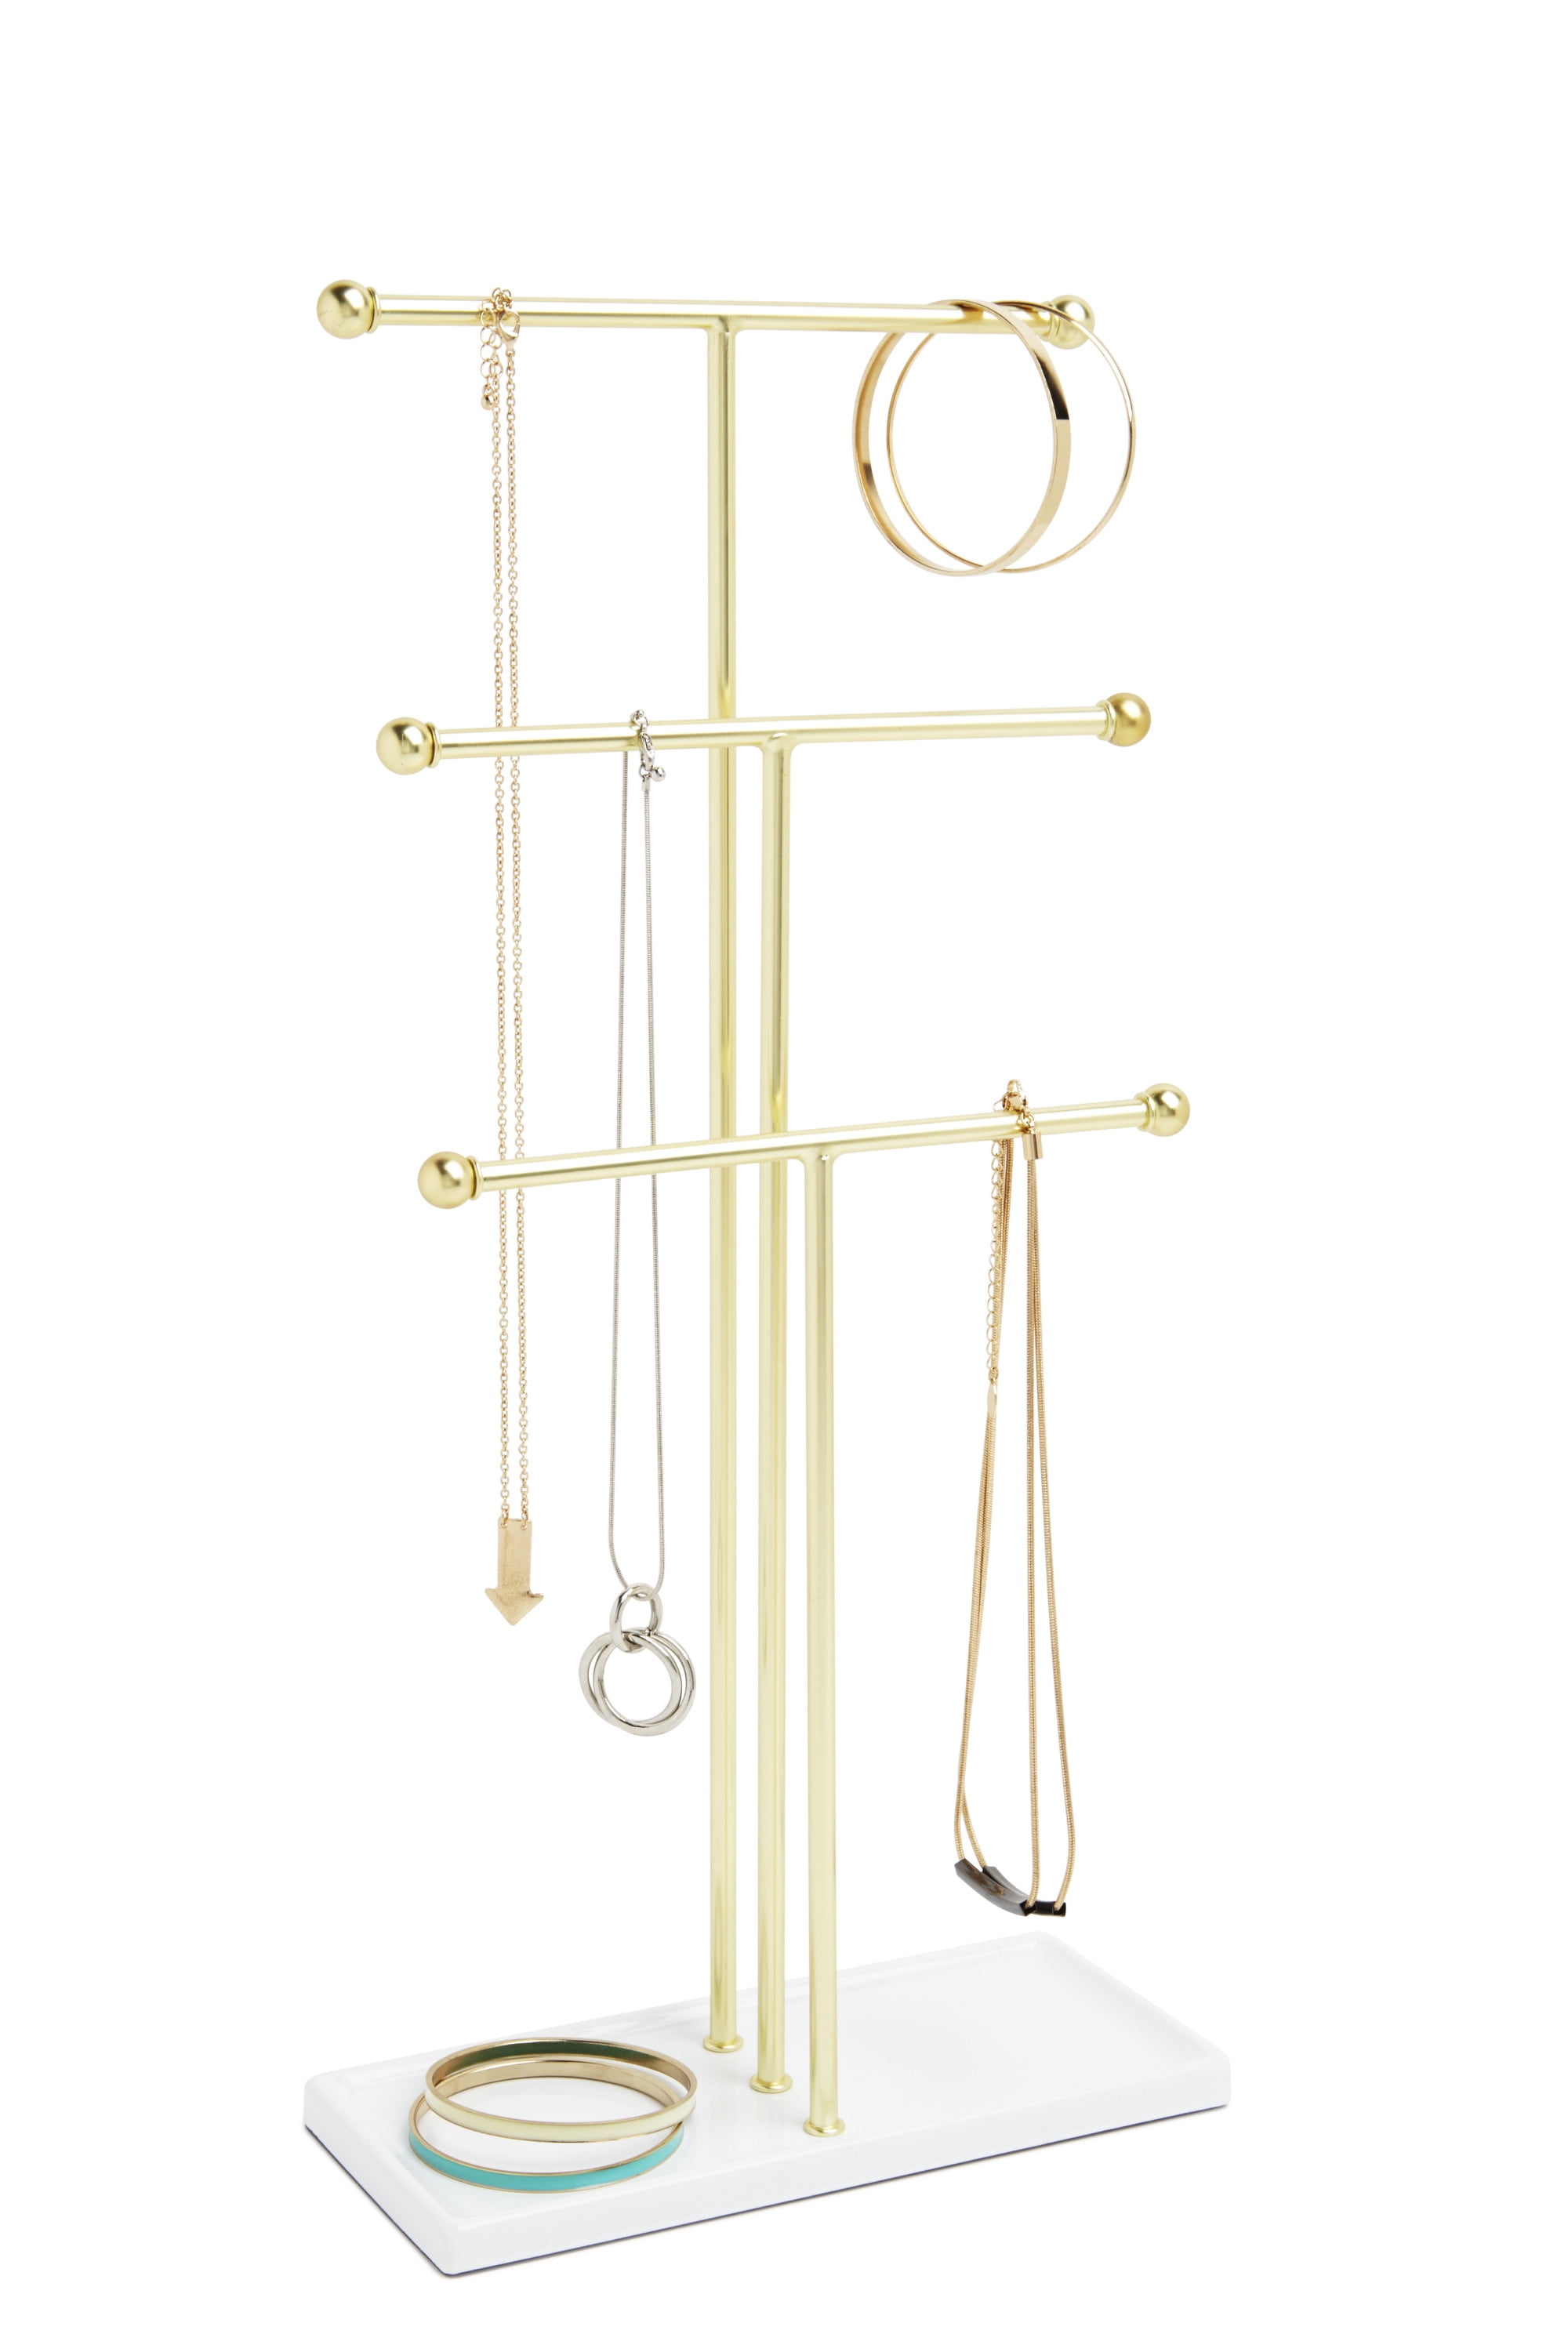 Details about   CW_ Earring Necklace Organizer Display Stand Holder Jewelry Accessories Rack Dec 